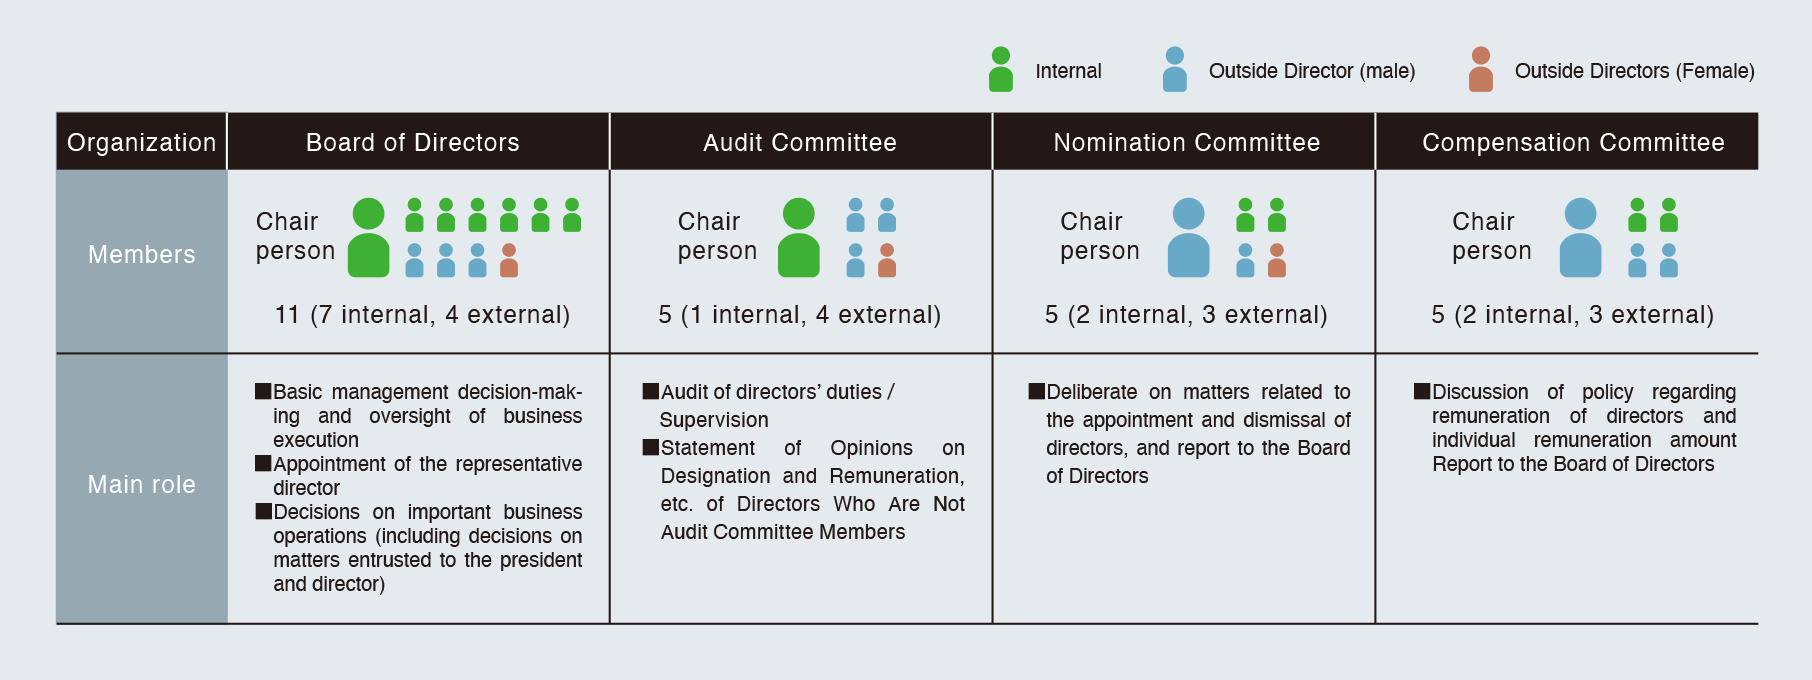 Composition and main roles of each organization